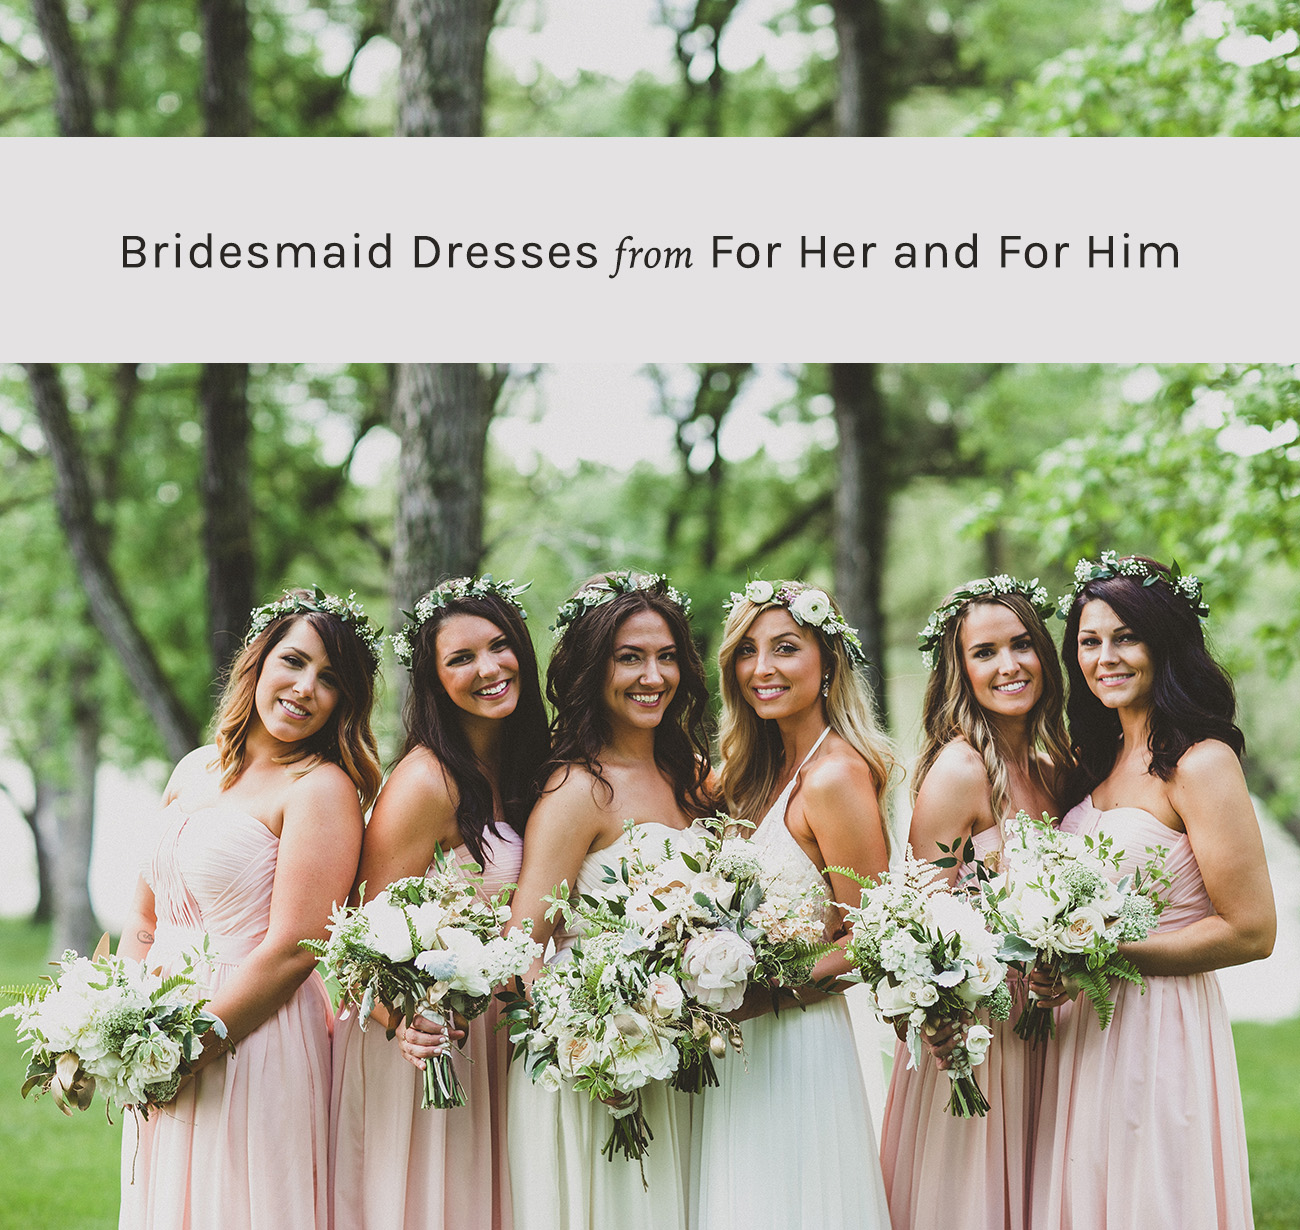 bridesmaid dresses from For Her and For Him